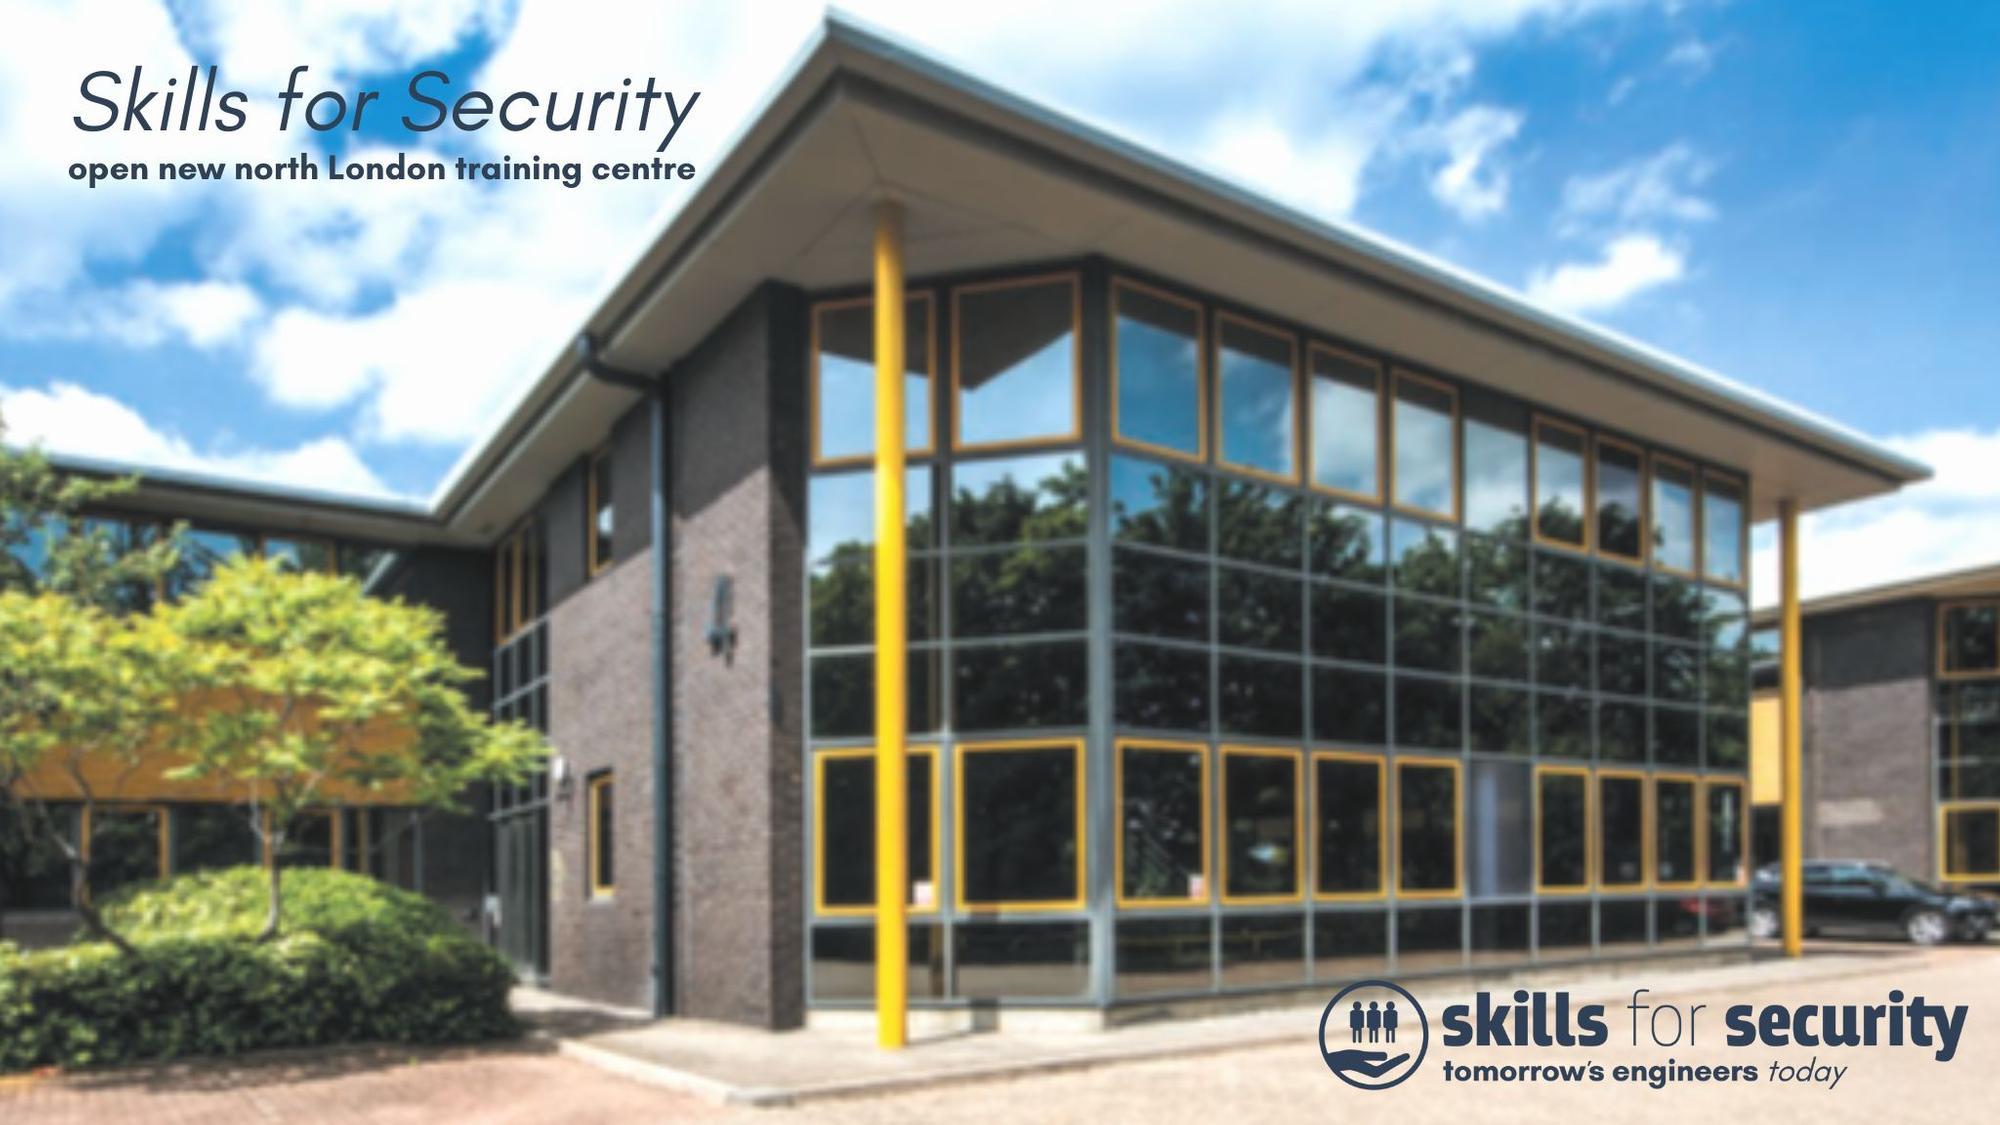 Skills for Security open new training centre in North London